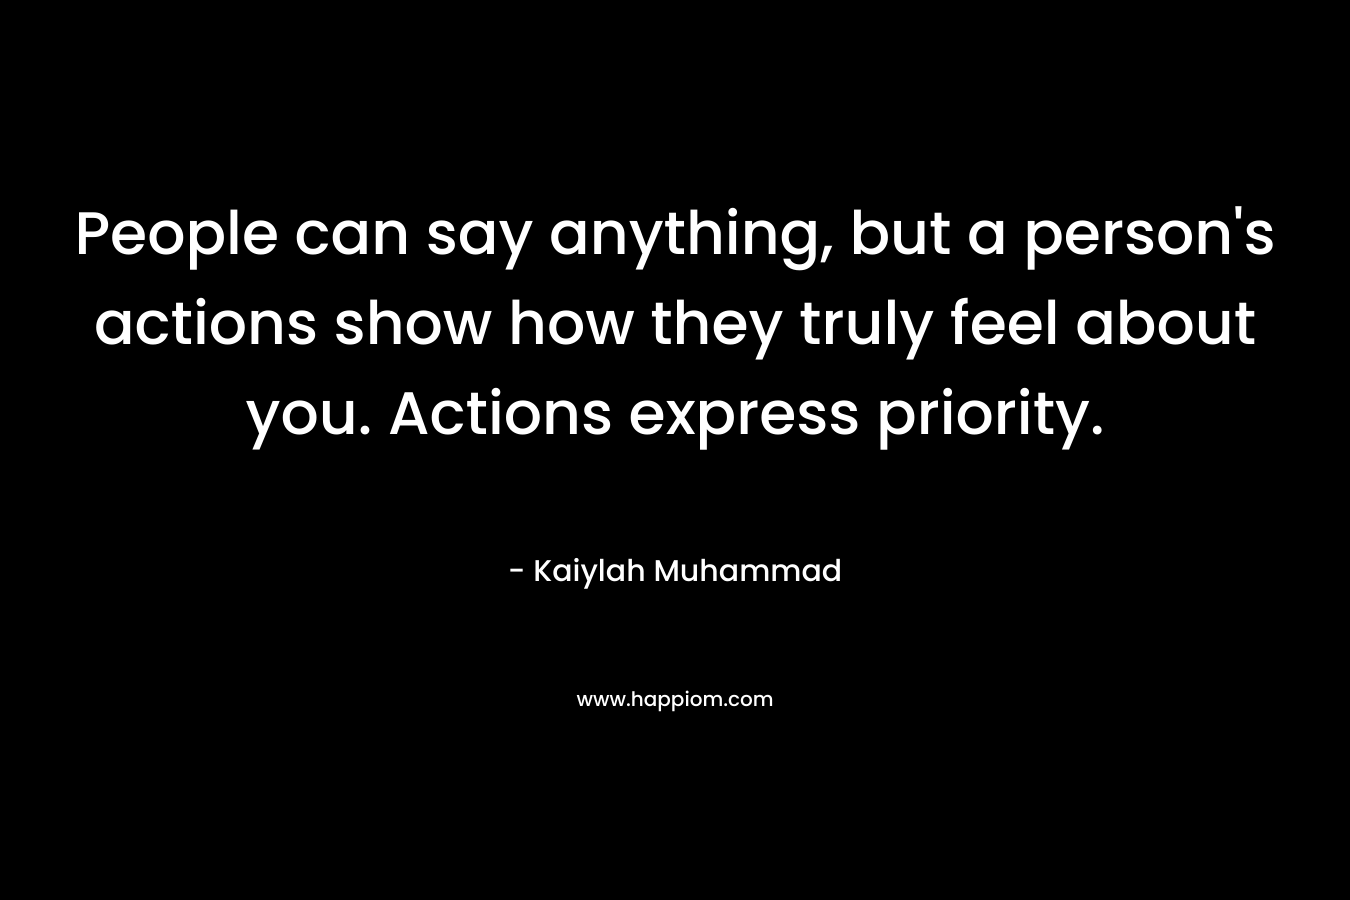 People can say anything, but a person's actions show how they truly feel about you. Actions express priority.